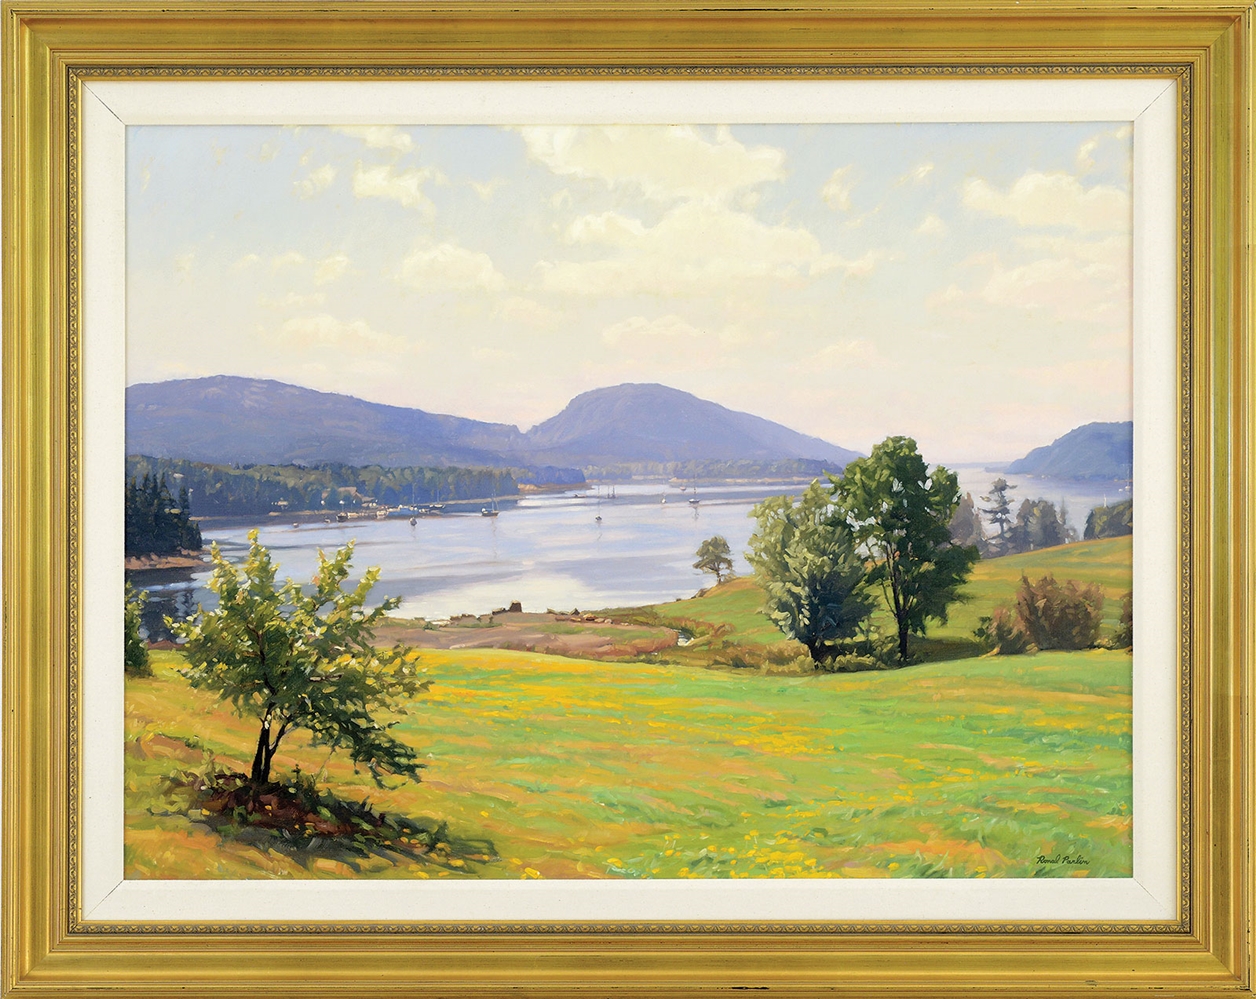 RONAL PARLIN (AMERICAN, 20TH CENTURY) "SOMESWHERE OVER THE RAINBOW", SOMES SOUND, ACADIA                                                                                                                